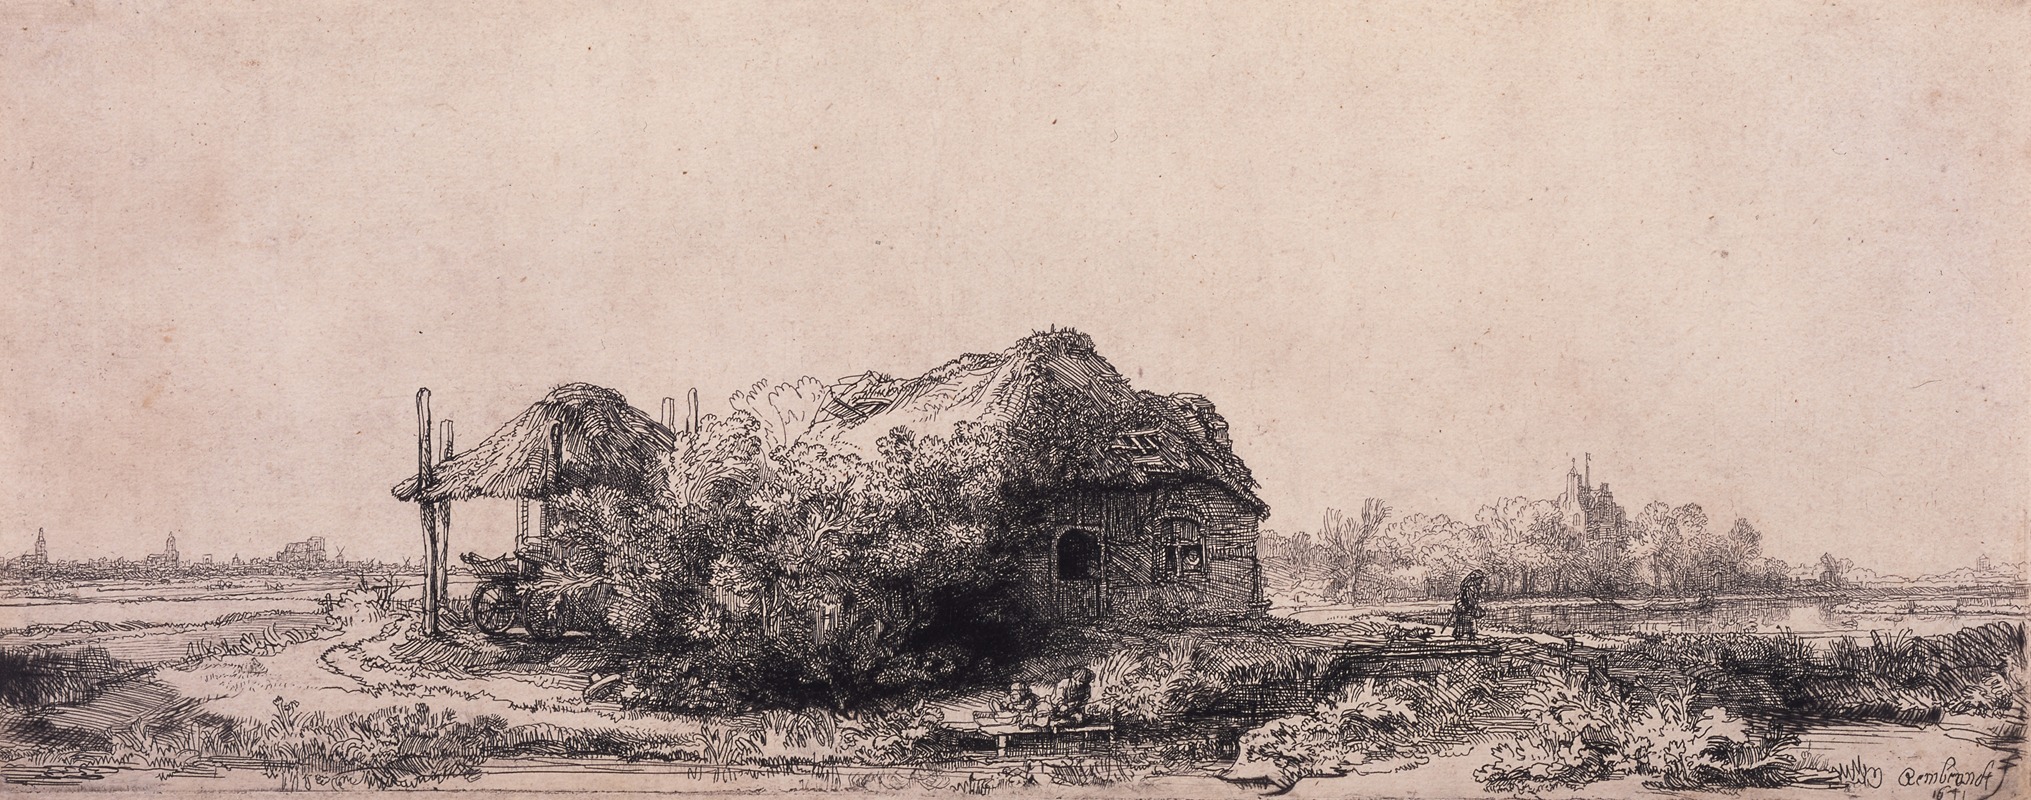 Rembrandt van Rijn - Landscape with a Cottage and Haybarn